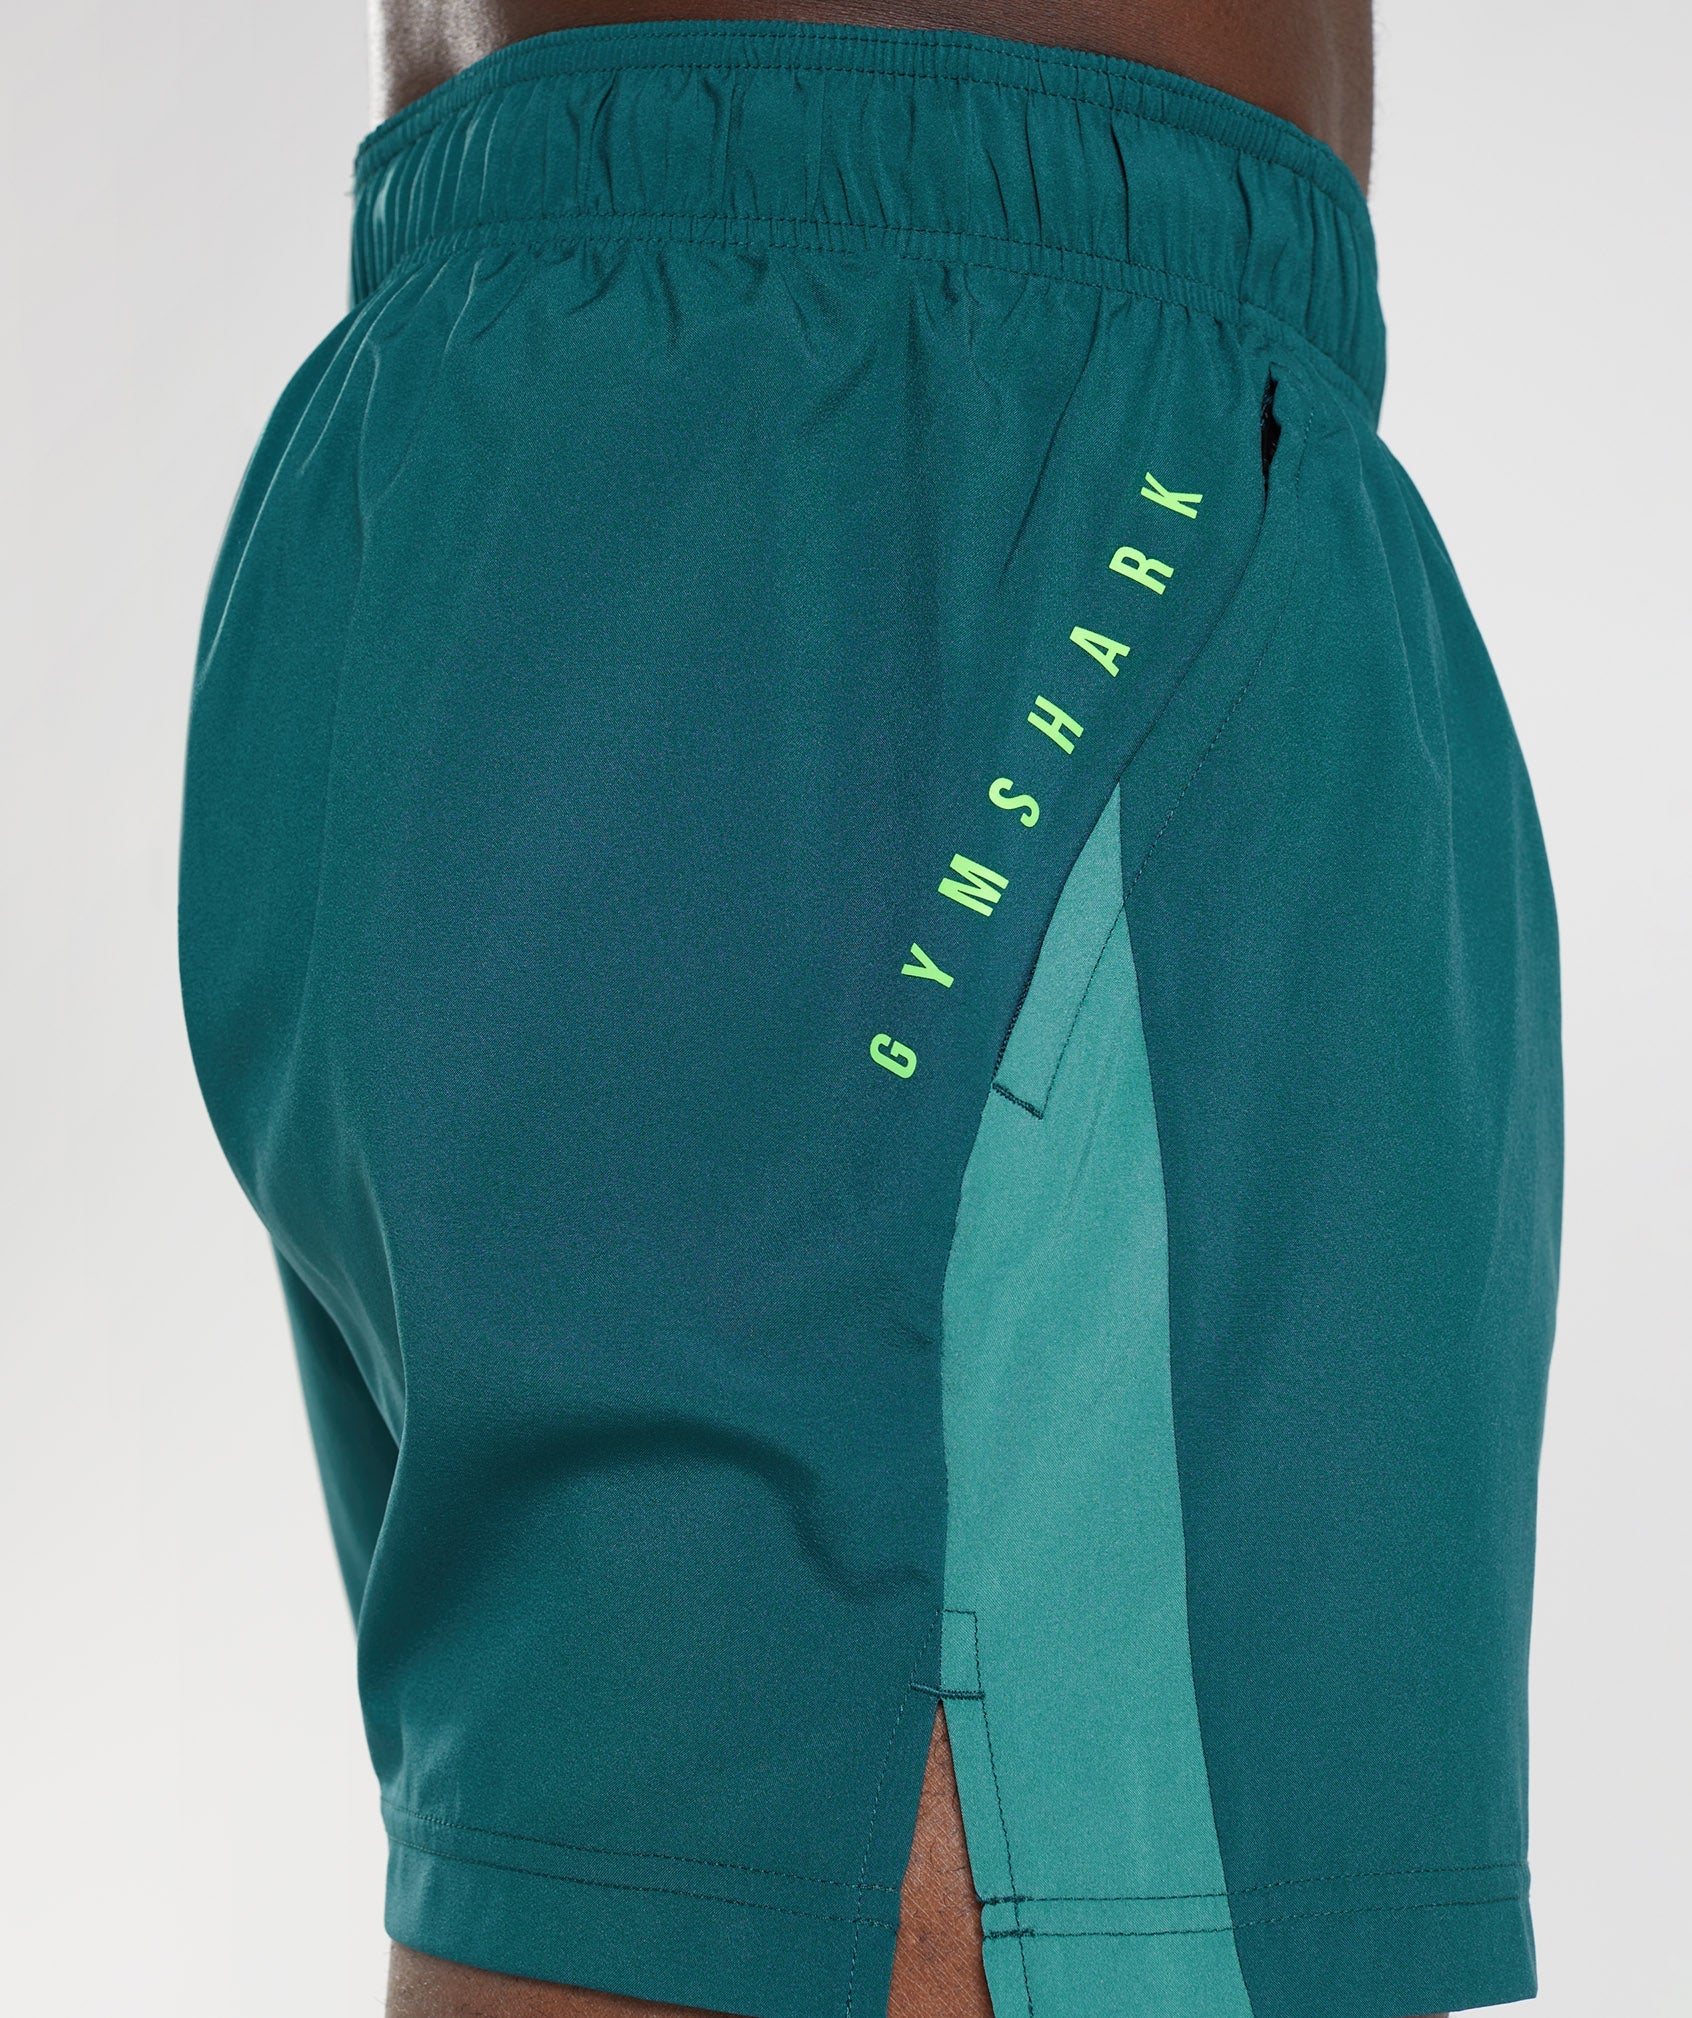 Sport 5" Shorts in Winter Teal/Slate Blue - view 6